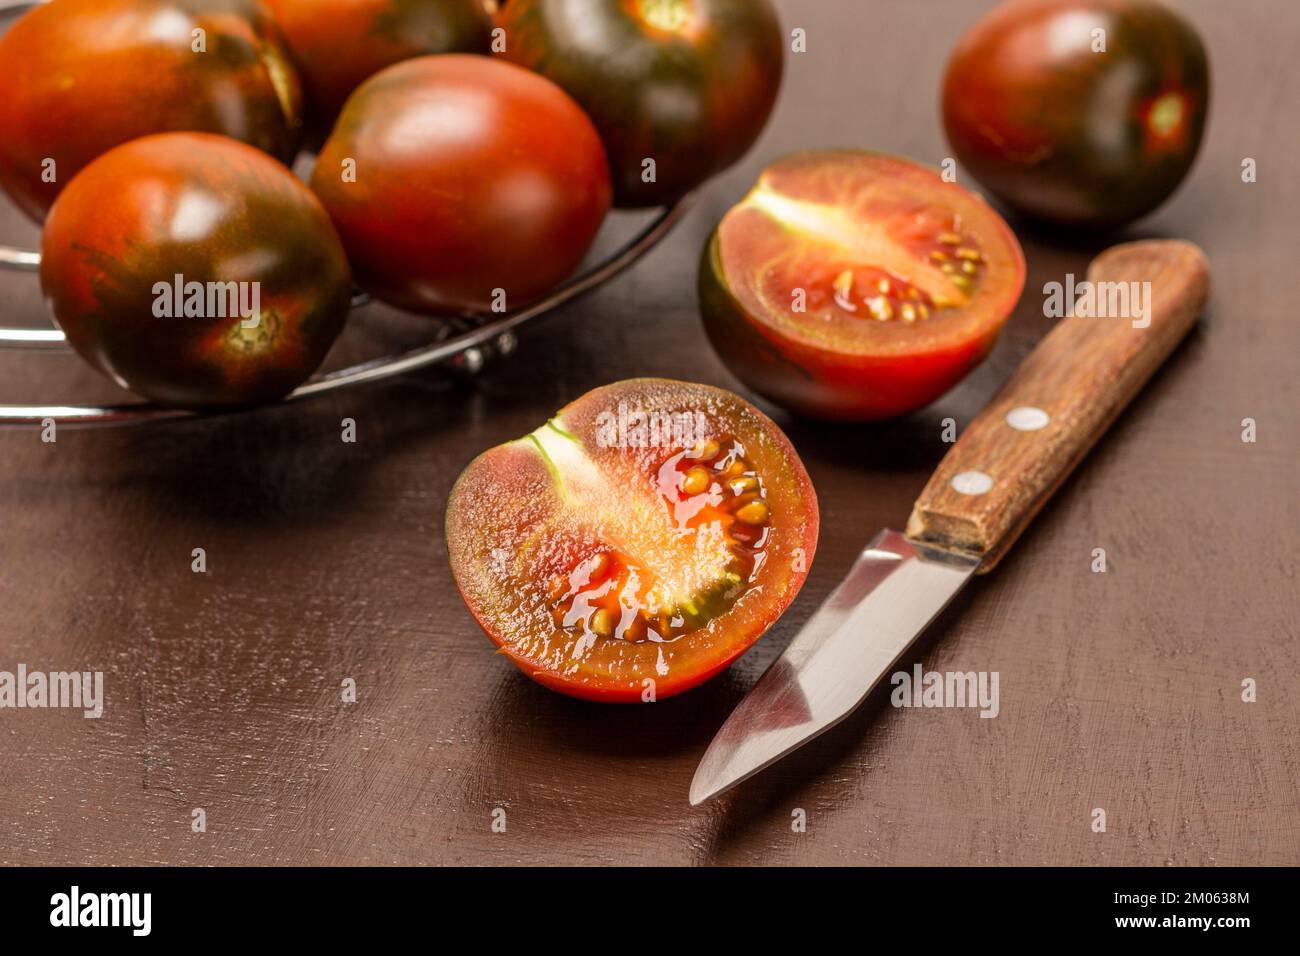 Knife and two halves of a tomato. Whole tomatoes on a metal stand. Top view. Brown background. Stock Photo